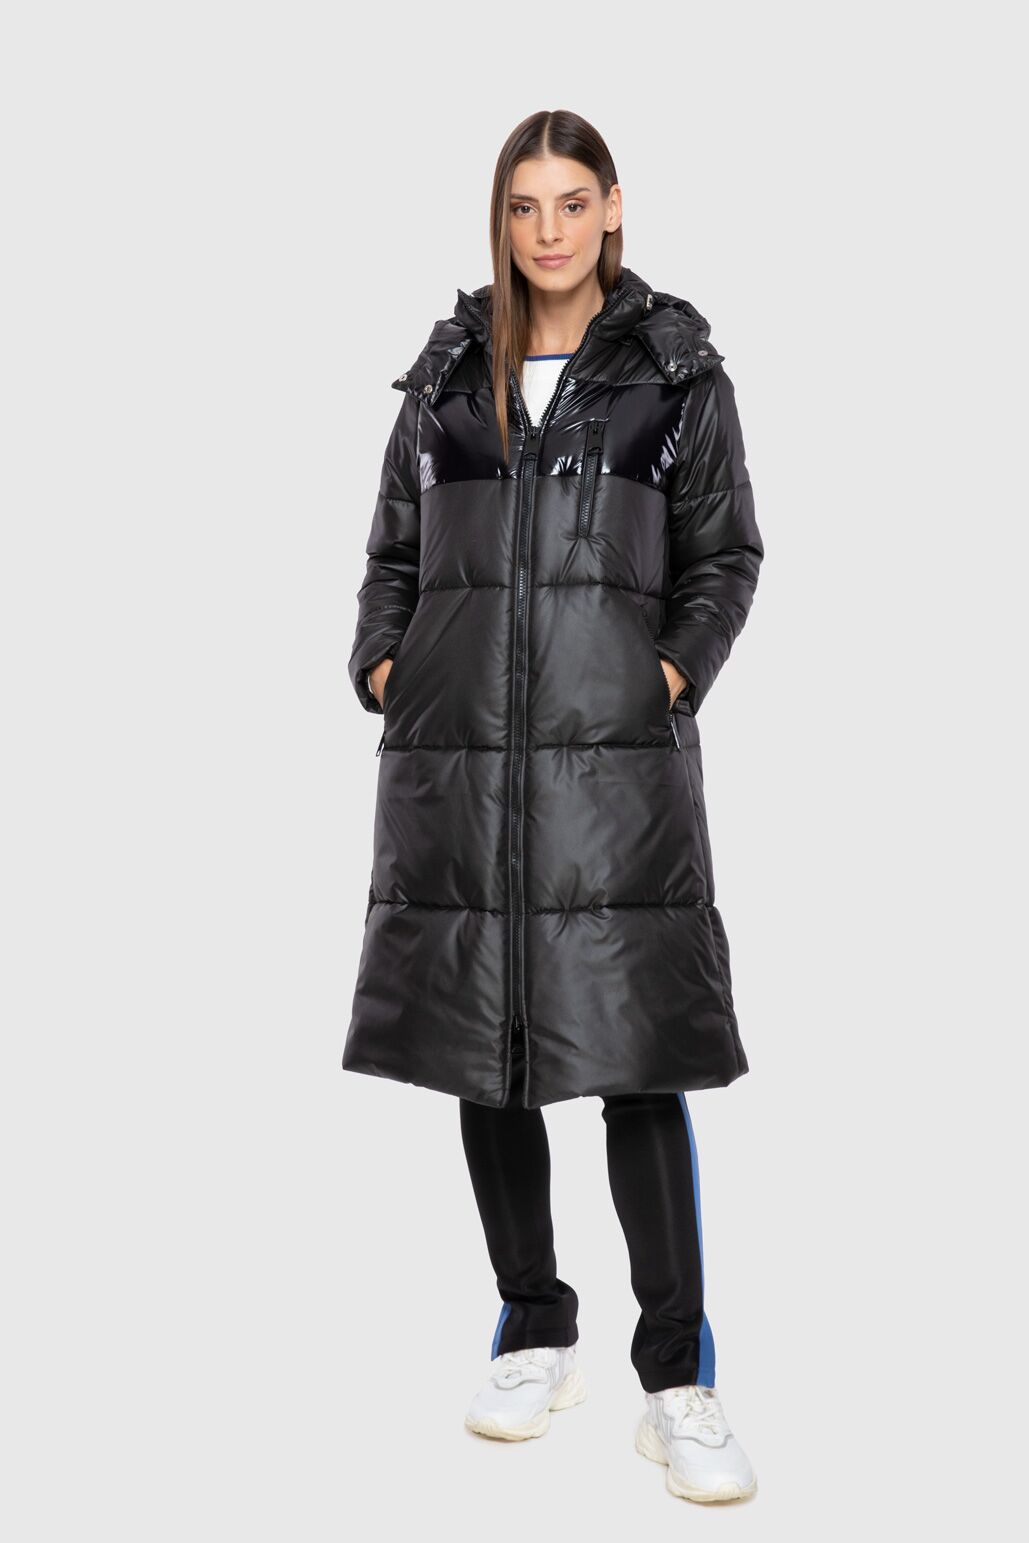  GIZIA - Glossy Surface Detailed Hooded Long Inflatable Jacket